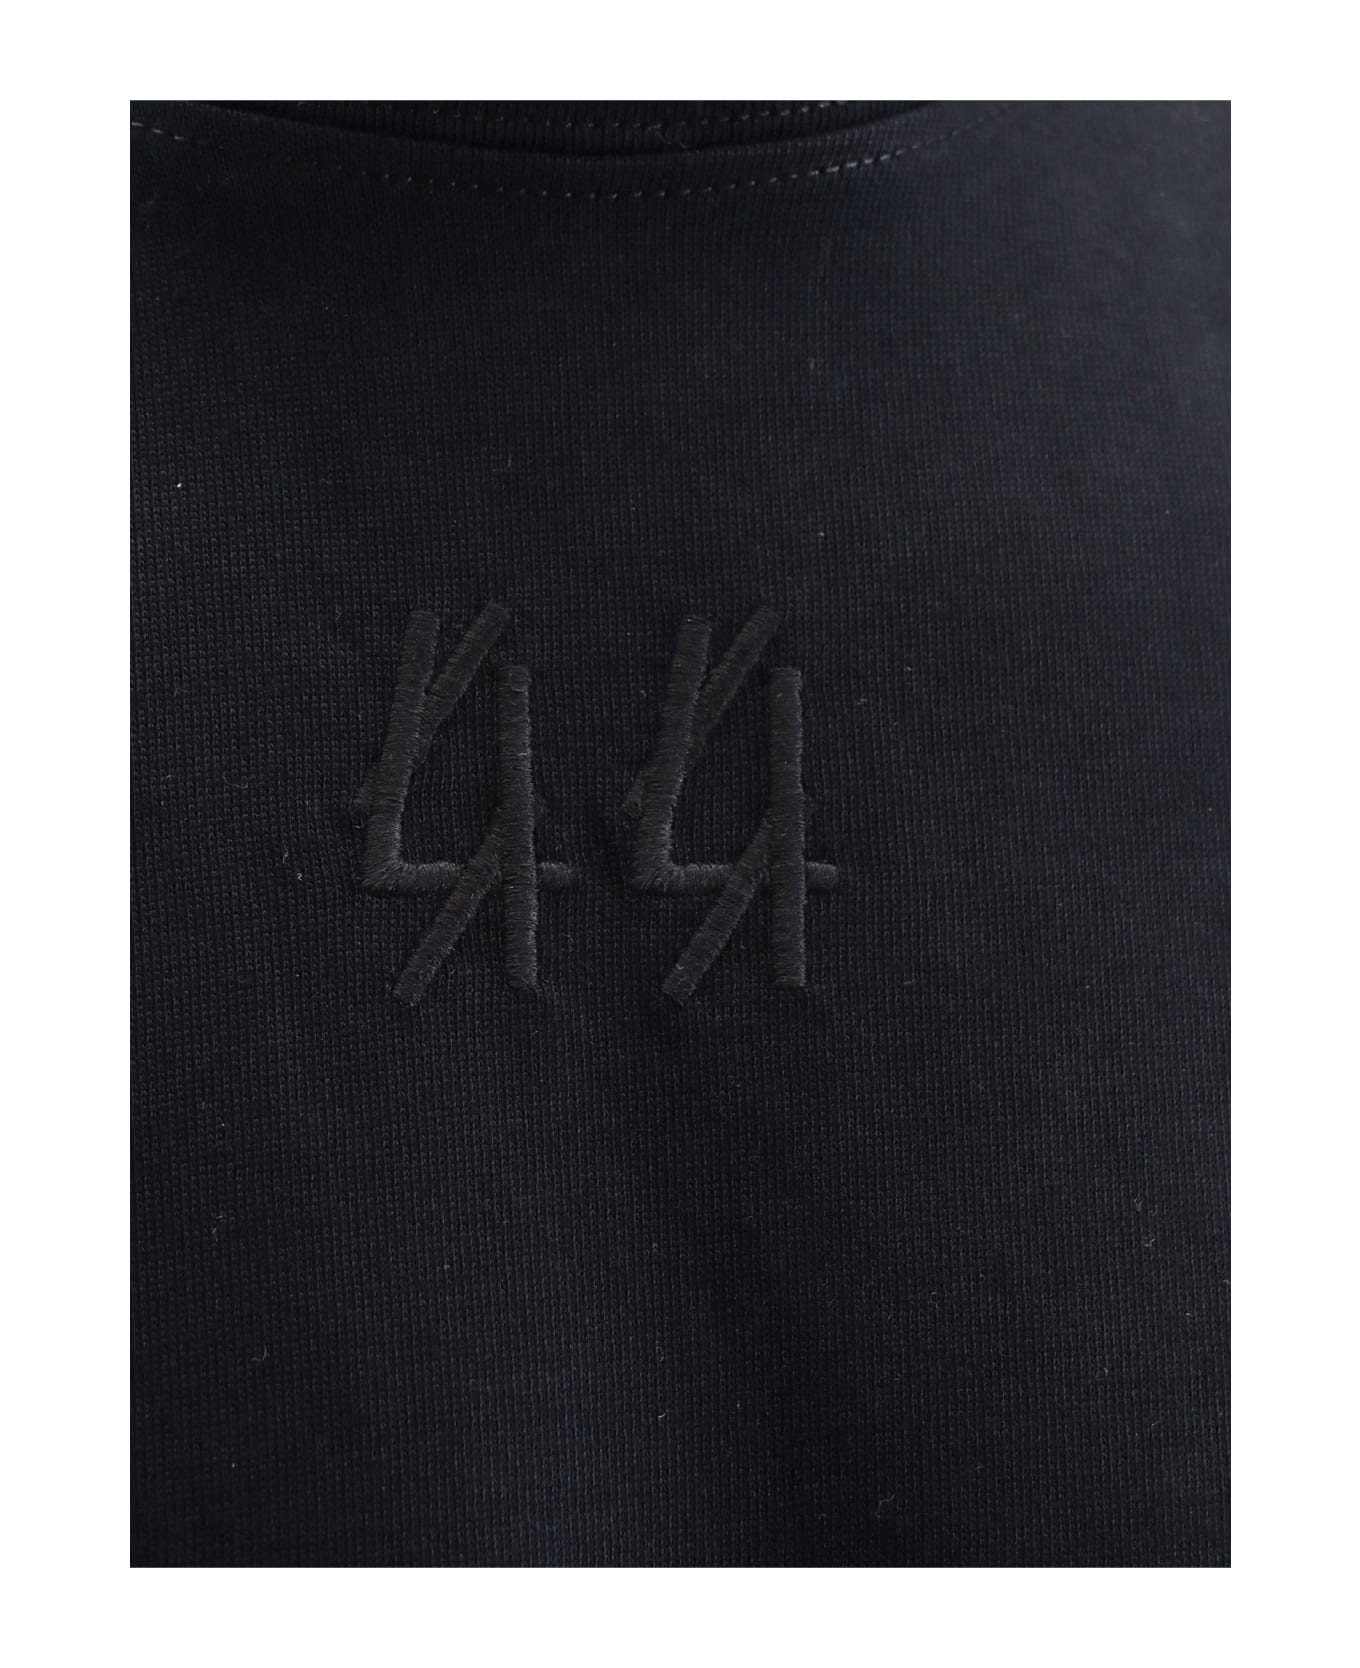 44 Label Group T-shirt With 44 Solid Dirty White Print - Nero